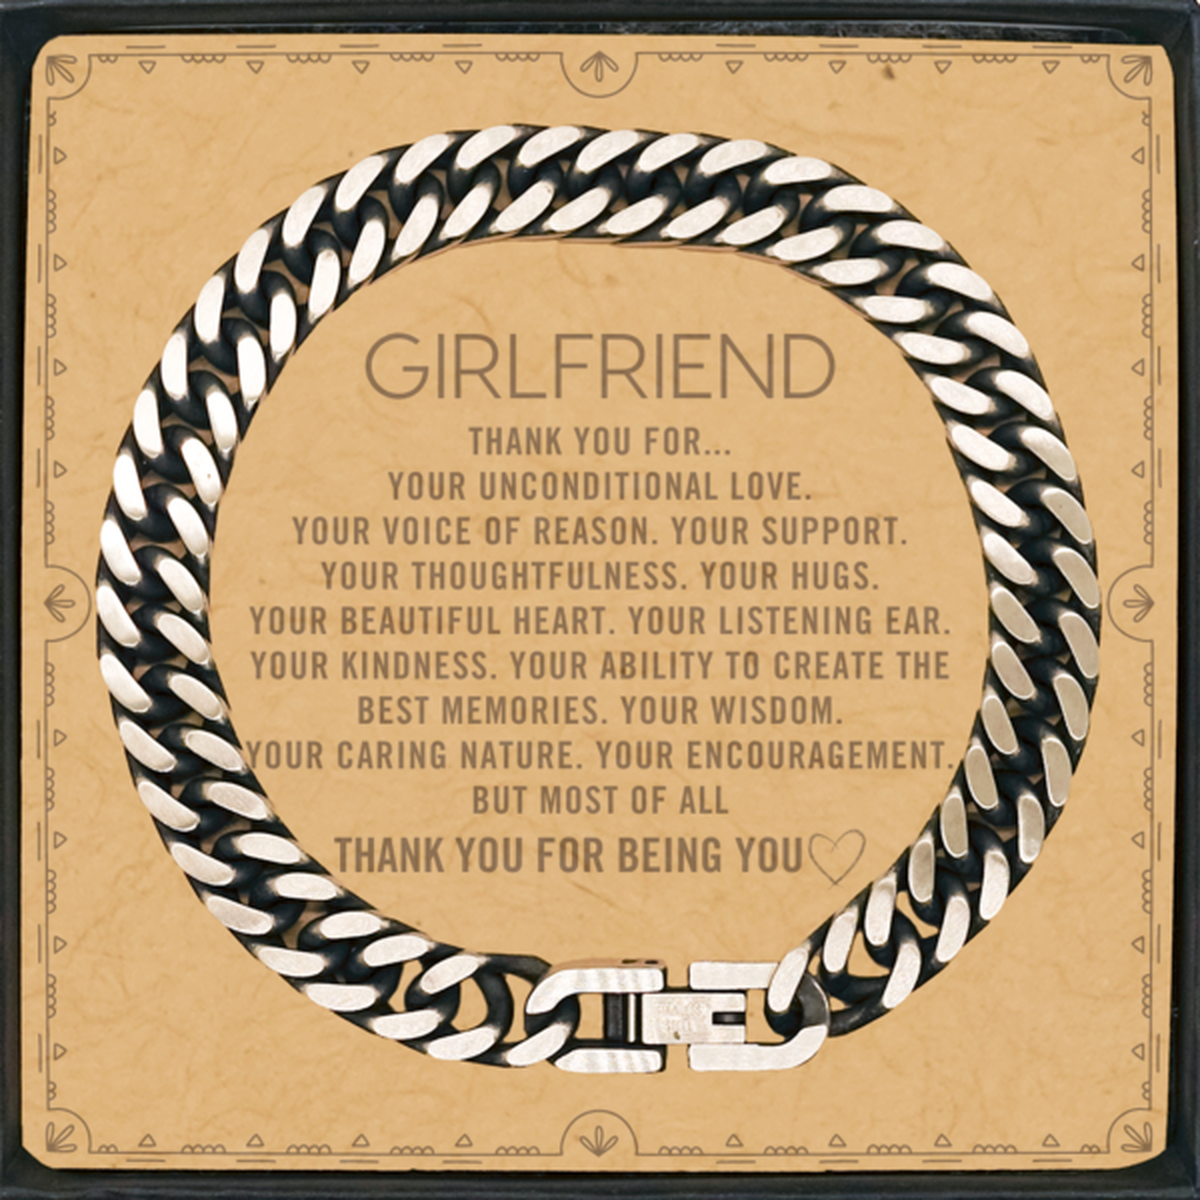 Girlfriend Cuban Link Chain Bracelet Custom, Message Card Gifts For Girlfriend Christmas Graduation Birthday Gifts for Men Women Girlfriend Thank you for Your unconditional love